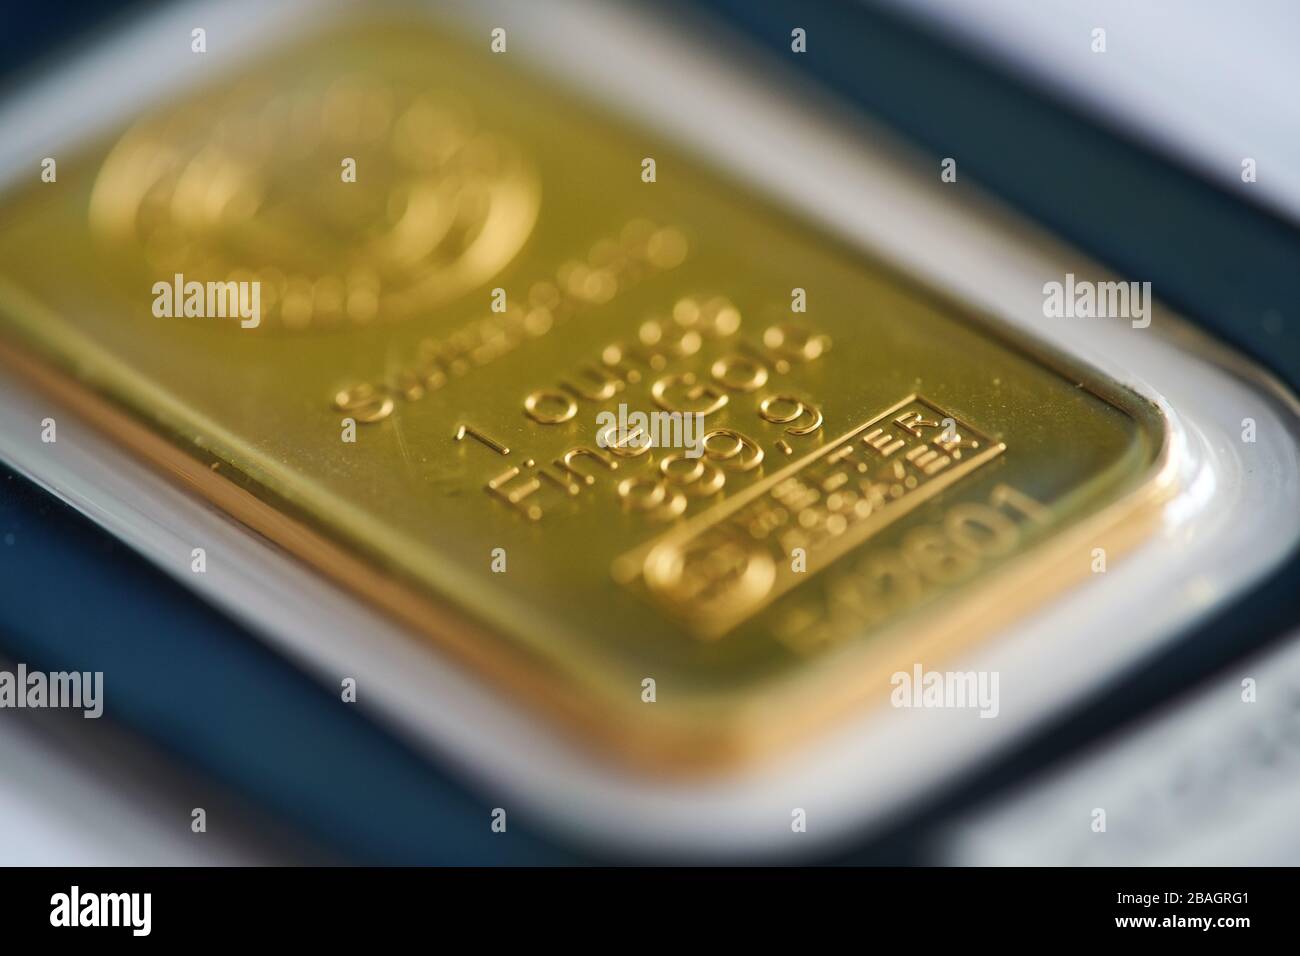 MUNICH, GERMANY - MARCH 27: Gold bars in the window of a gold trader on March 27, 2020 in Munich, Germany. © Peter Schatz / Alamy Live News Stock Photo